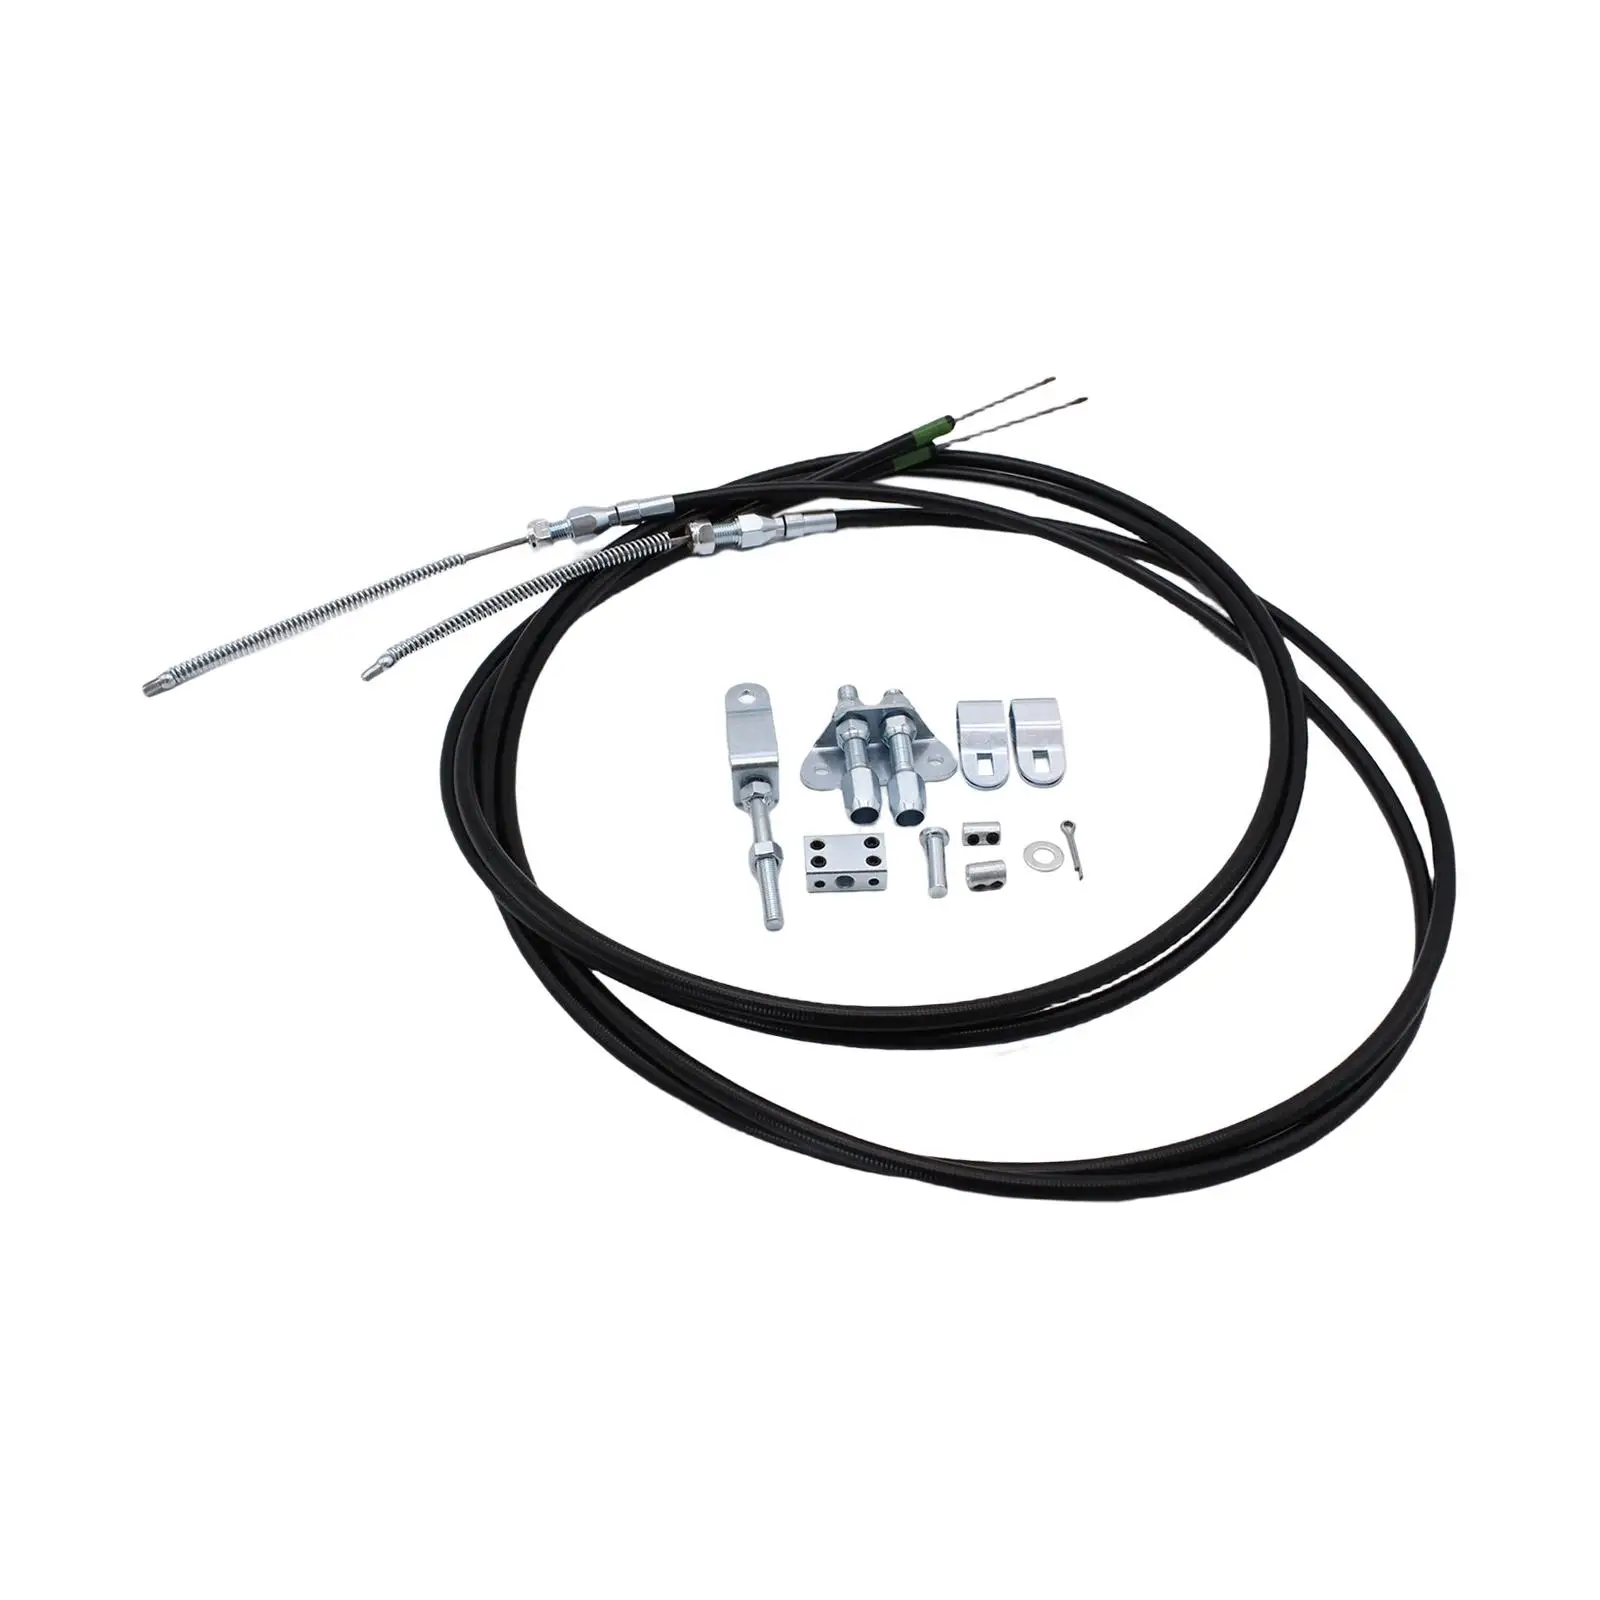 Automotive Emergency Parking Brake Cable Set 330-9371 Professional Accessory Include Installation Hardware Simple to Assemble